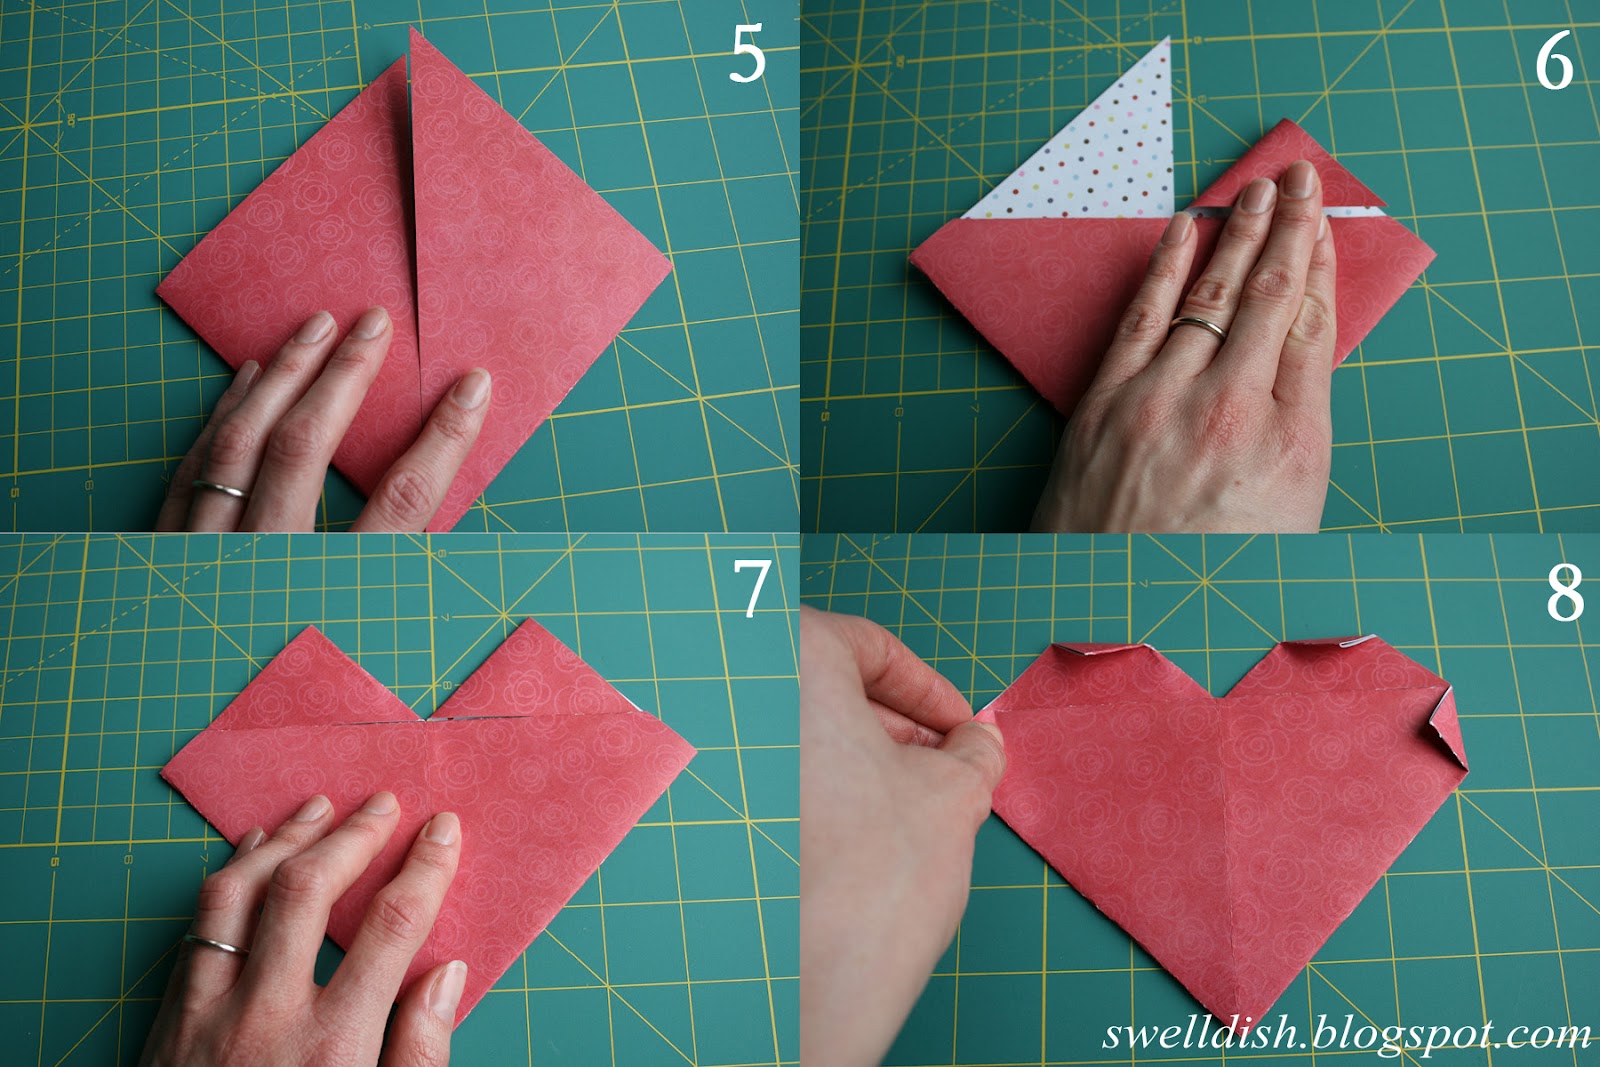 The Swell Dish: Valentine Paper Heart Gift Card/Note Holders